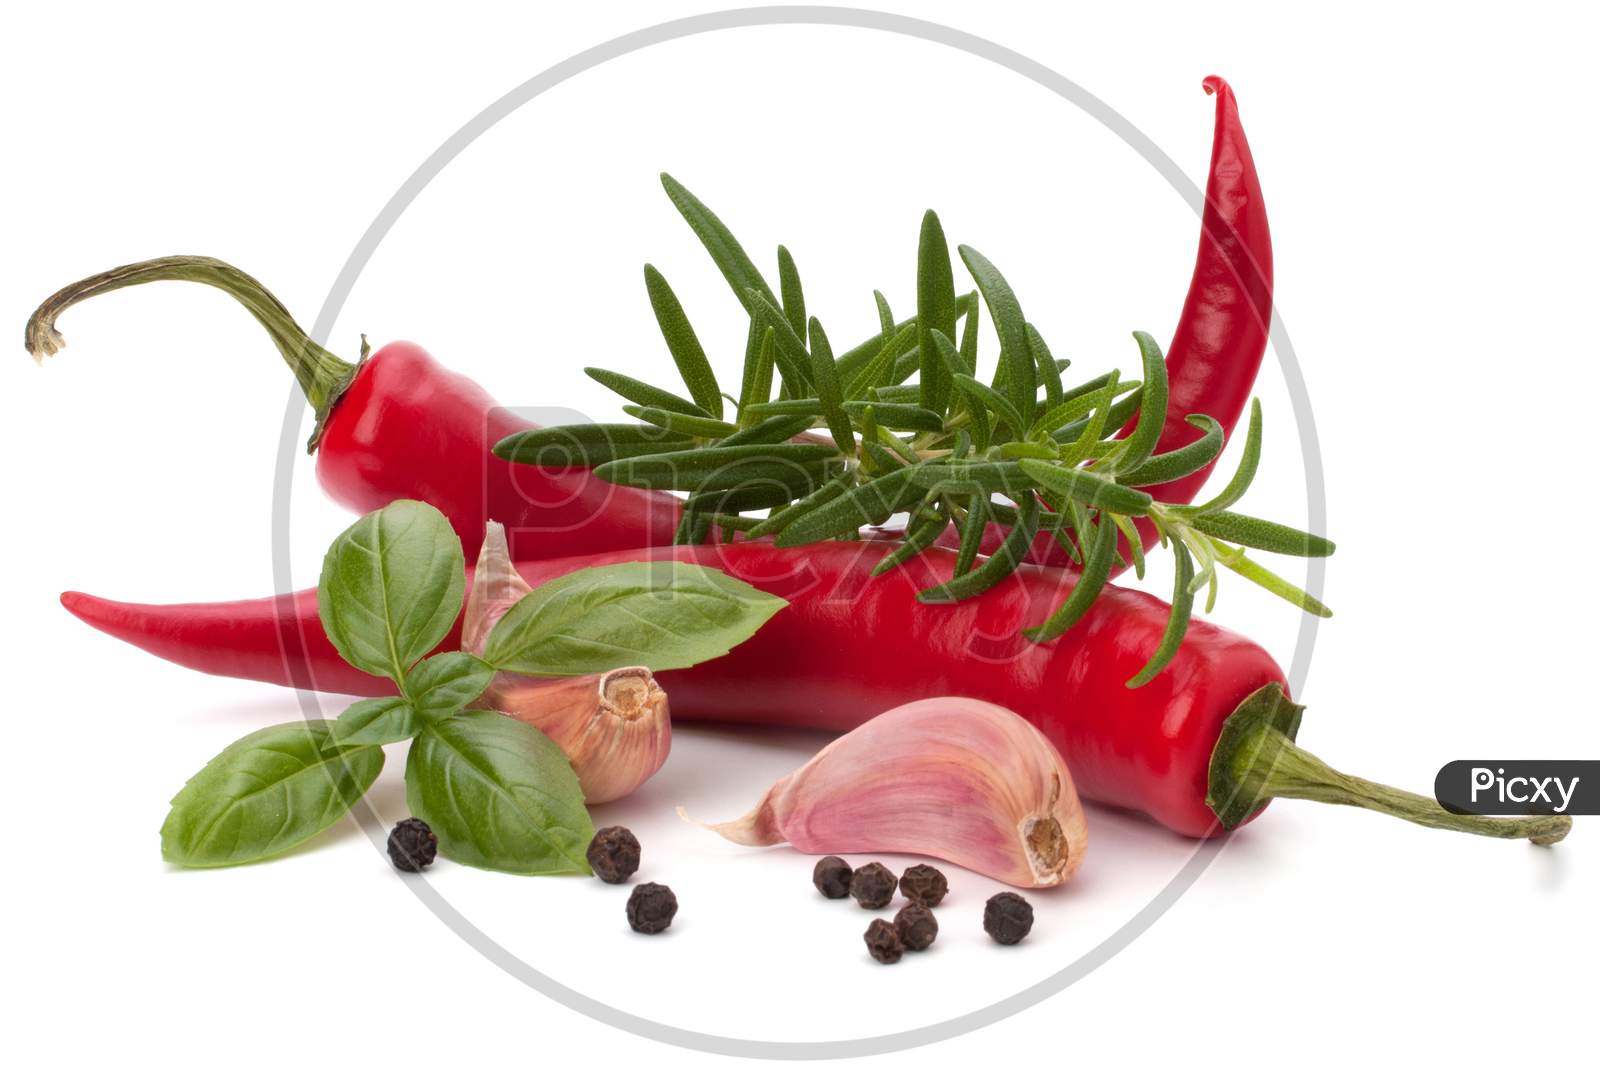 Close-Up Of Red Chili Peppers Against White Background Long Red March Inspirational Scene